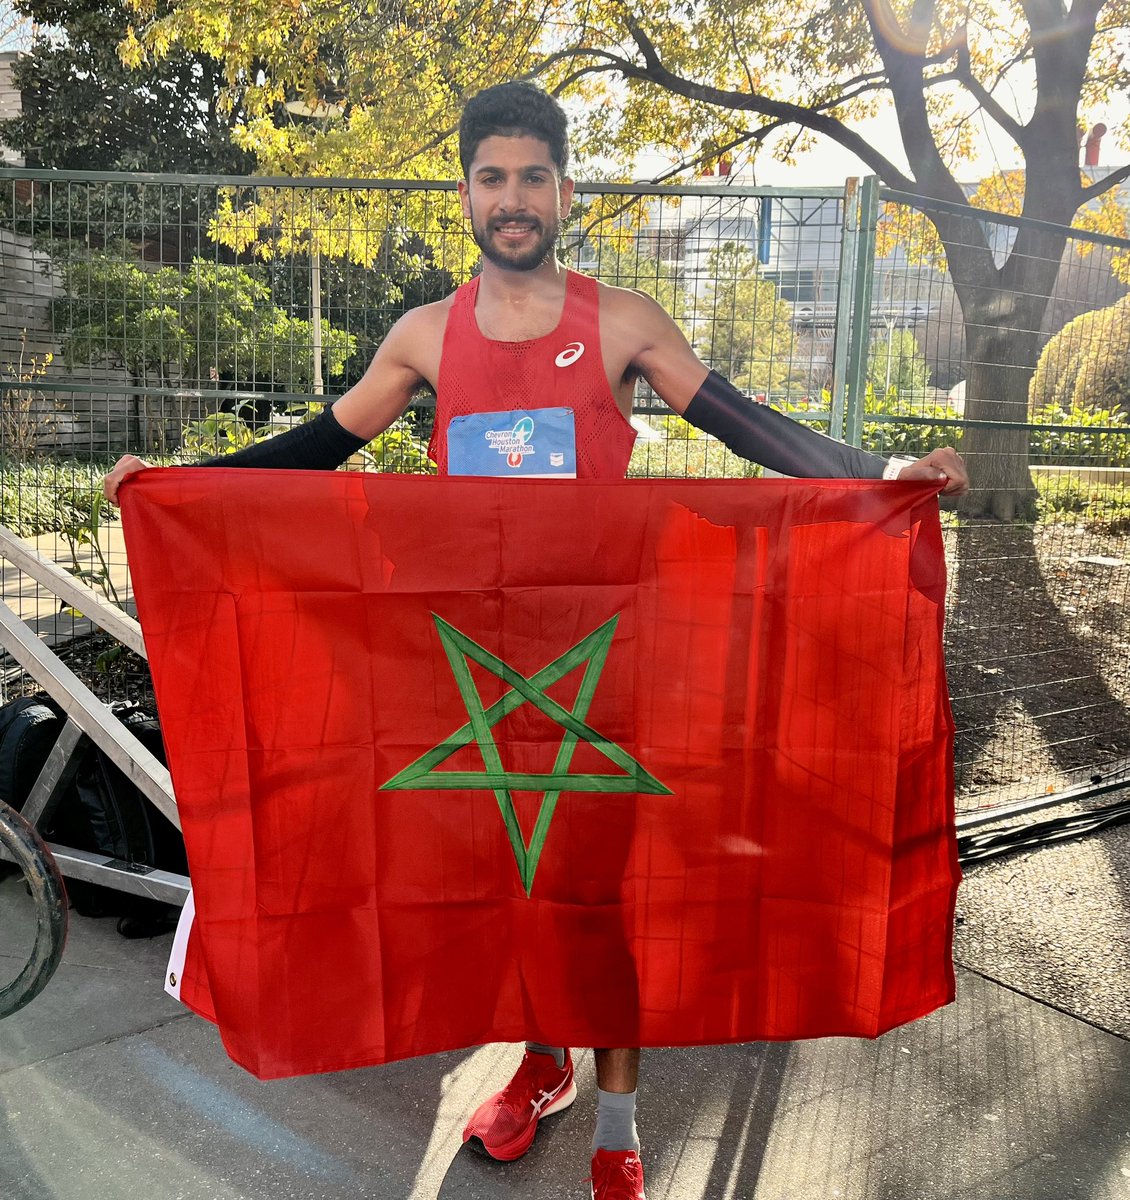 Congrats to @zouhair_talbi from #Morocco coming in at first place at 2:06:39 at the Chevron Houston Marathon. #HOUMARATHON #HOUHALF #HOU5K #RUNHOU @KHOU